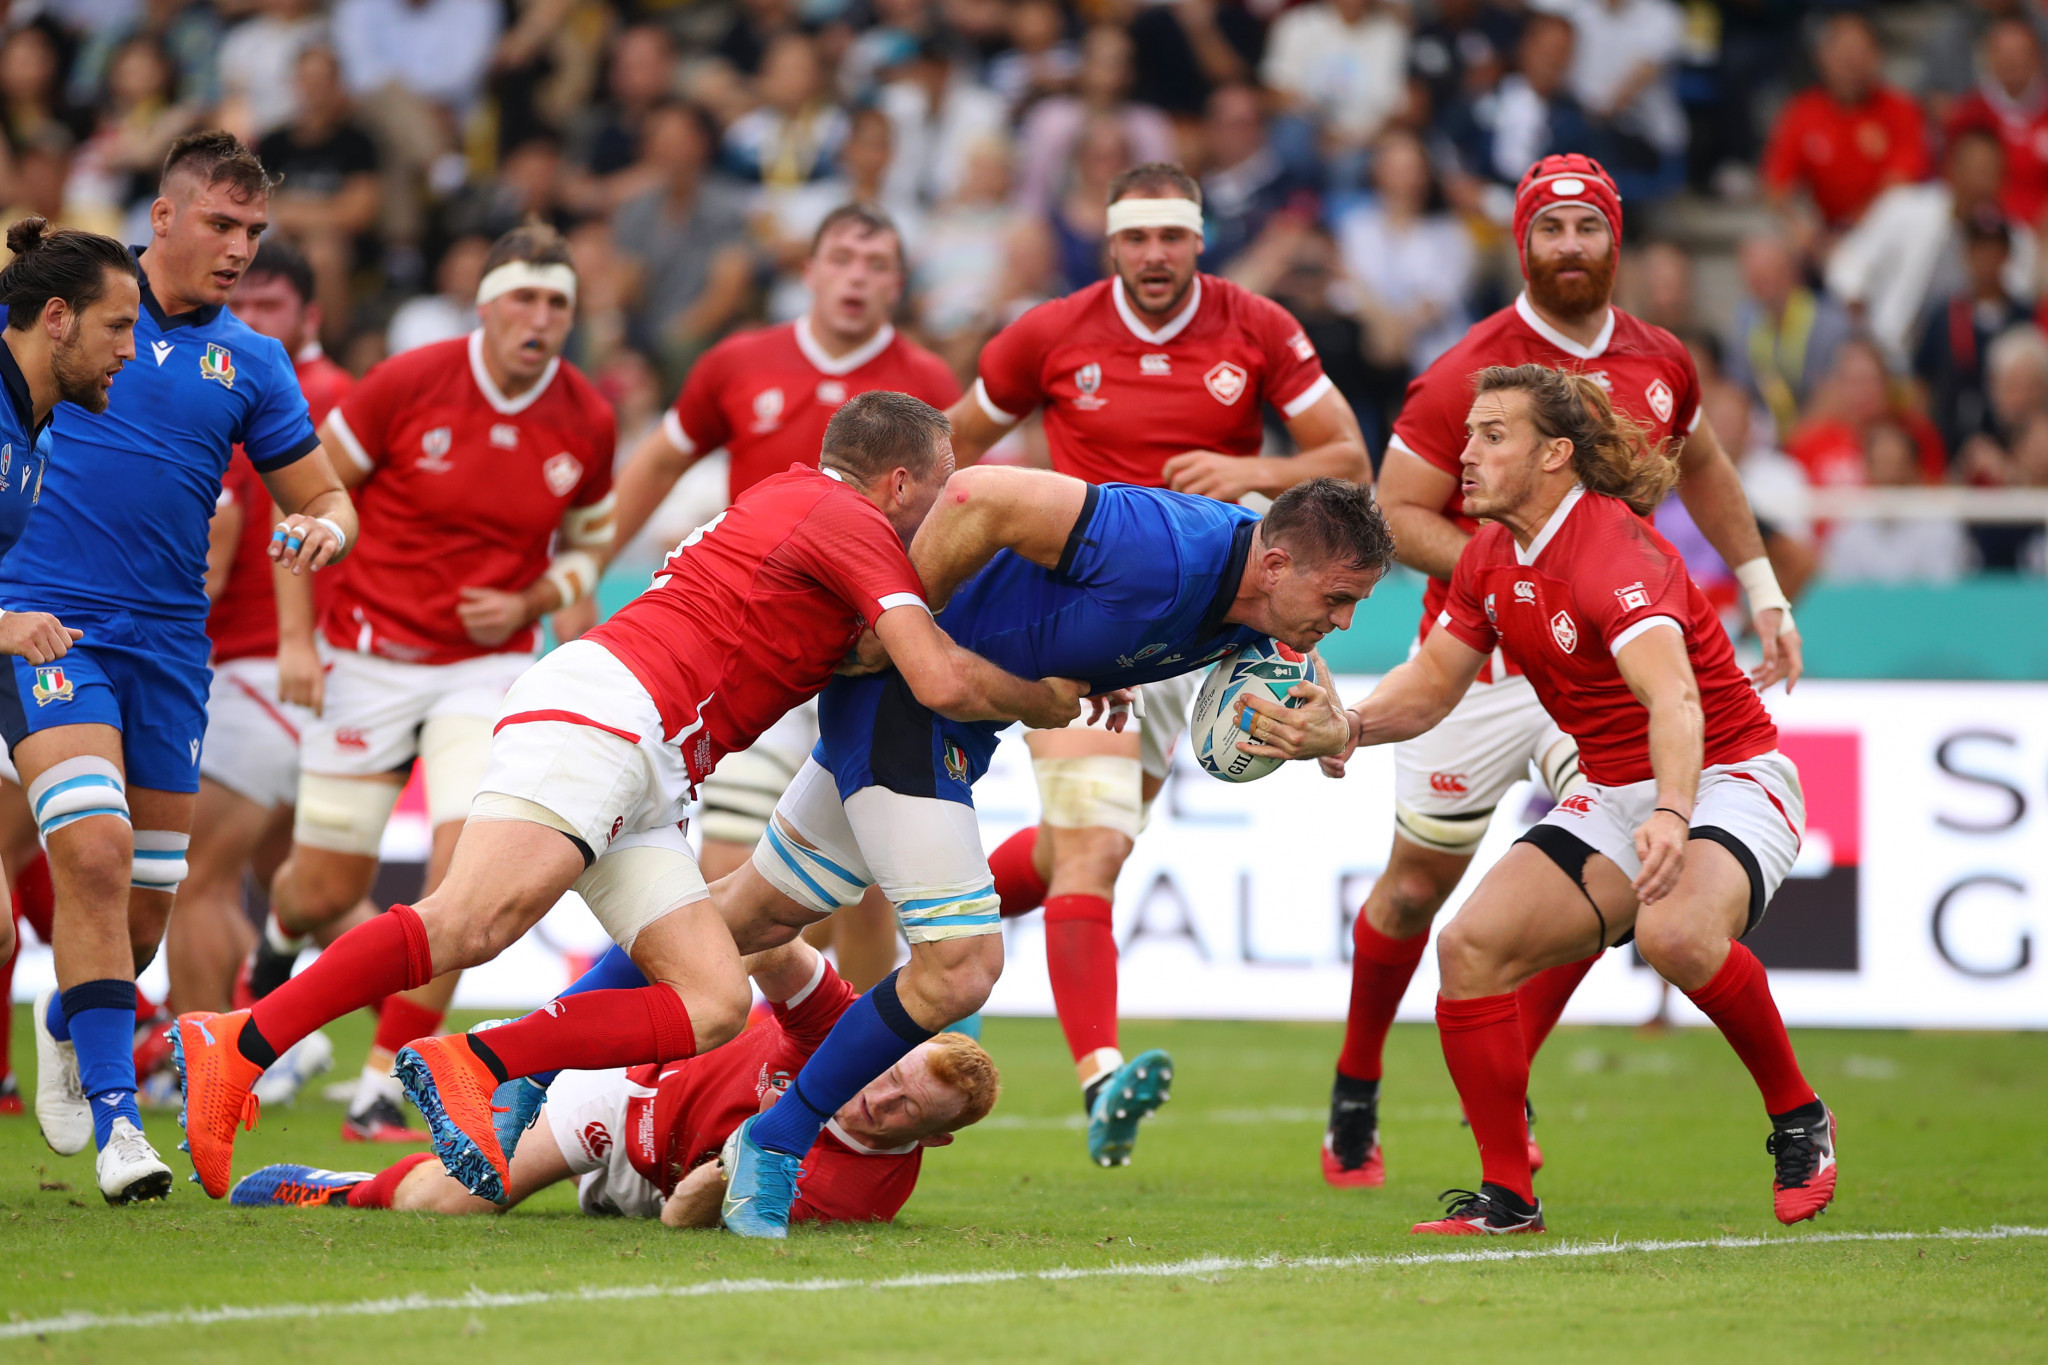 Braam Steyn gets the scoring underway for Italy against Canada ©Getty Images